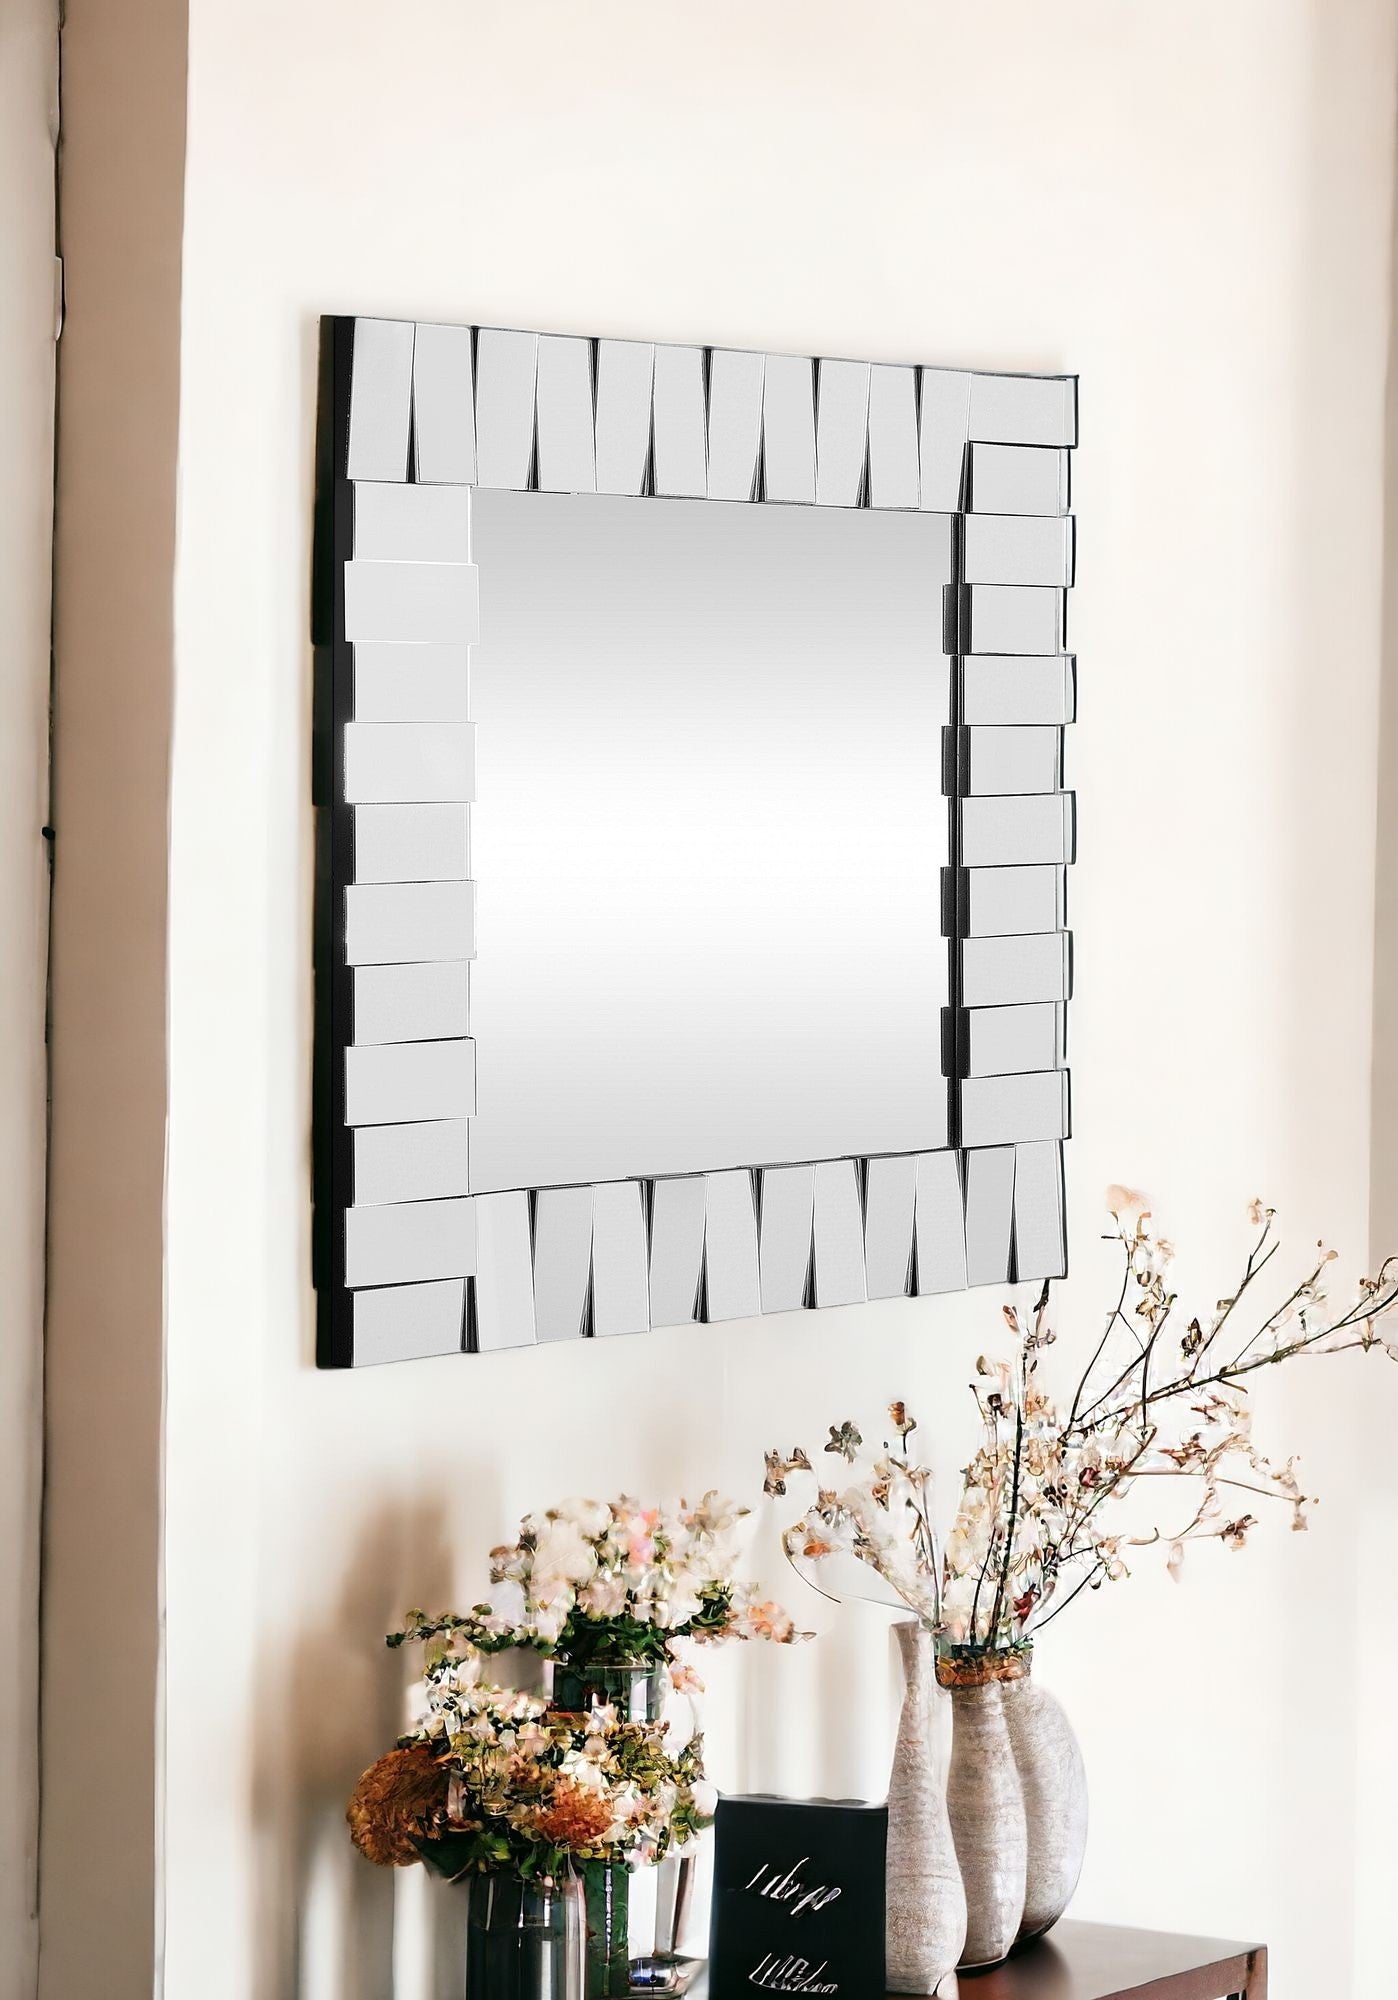 28" Clear Square Glass Framed Accent Mirror